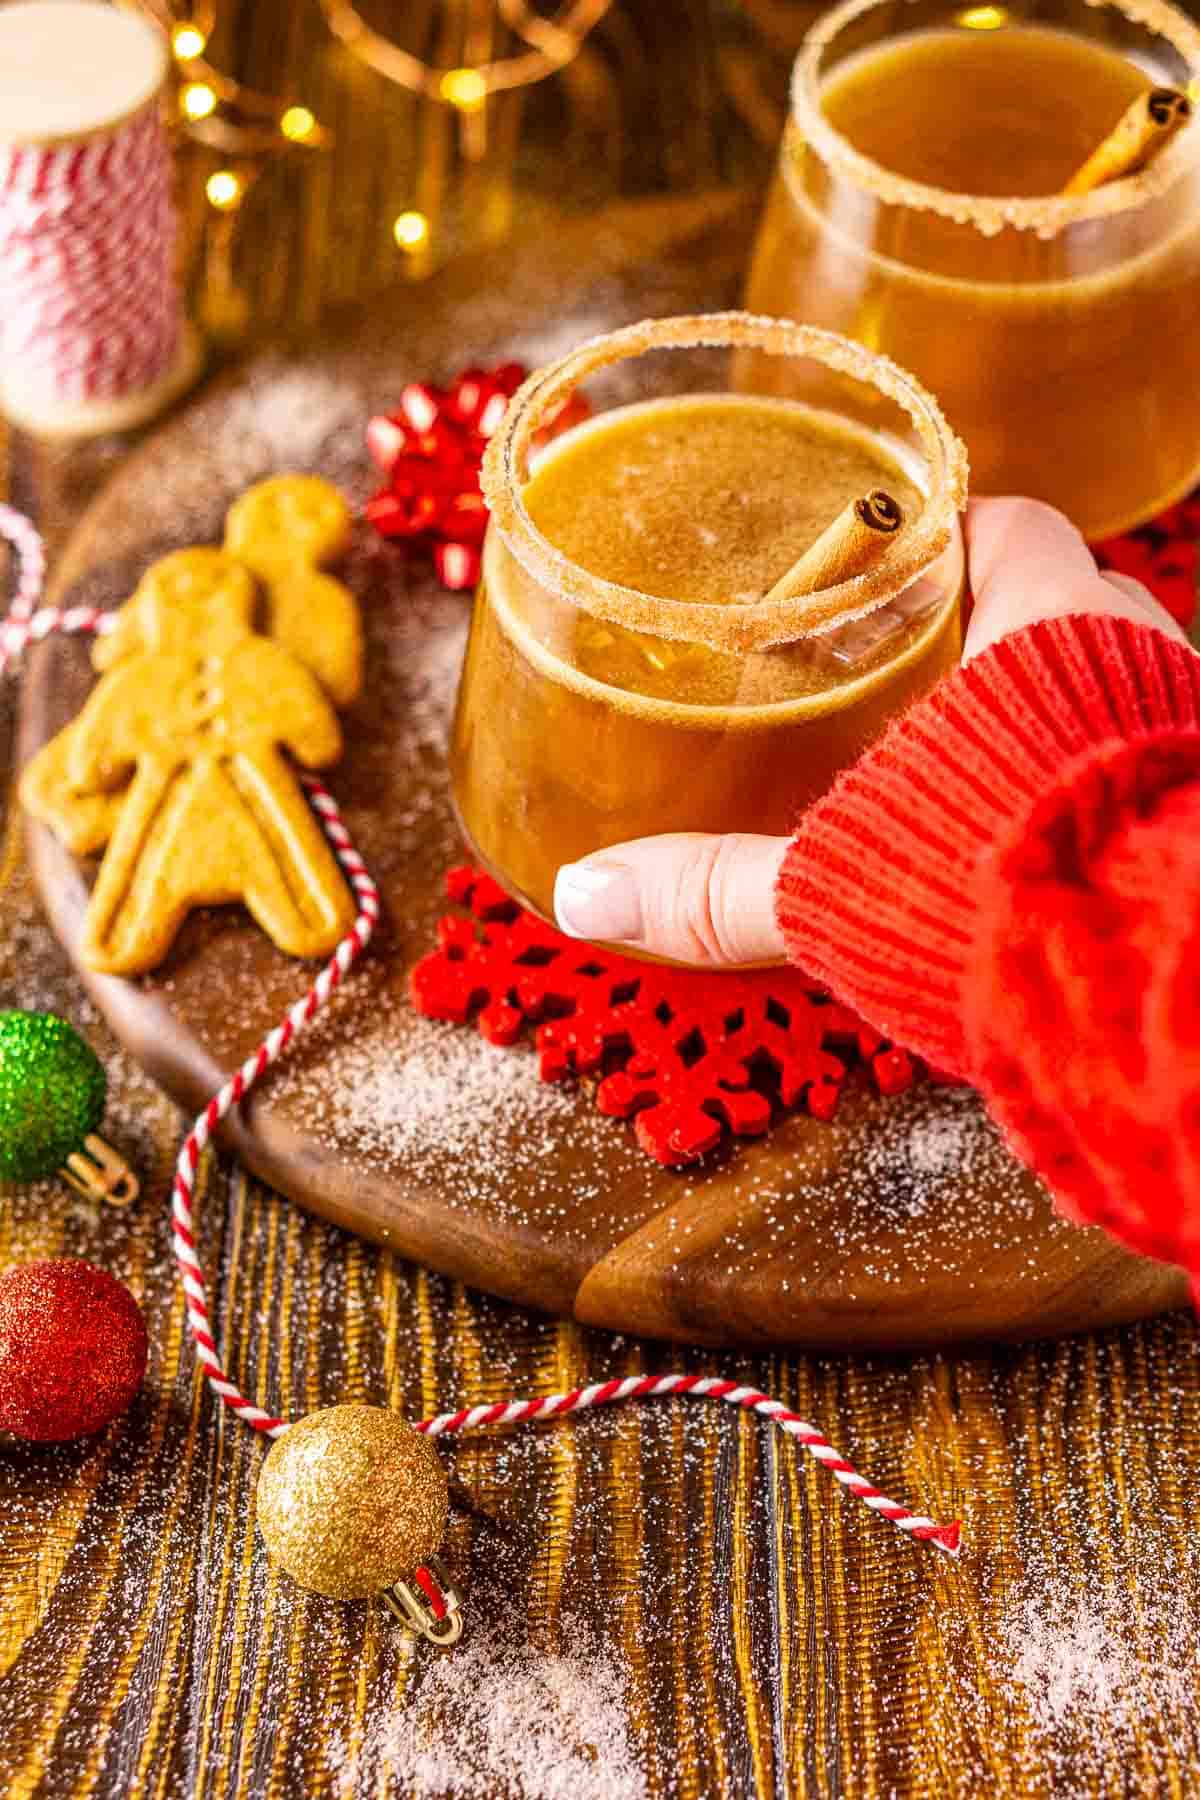 An arm in a red Christmas sweater reaching out to pick up the gingerbread margarita on a wooden plate with holiday decor around it.